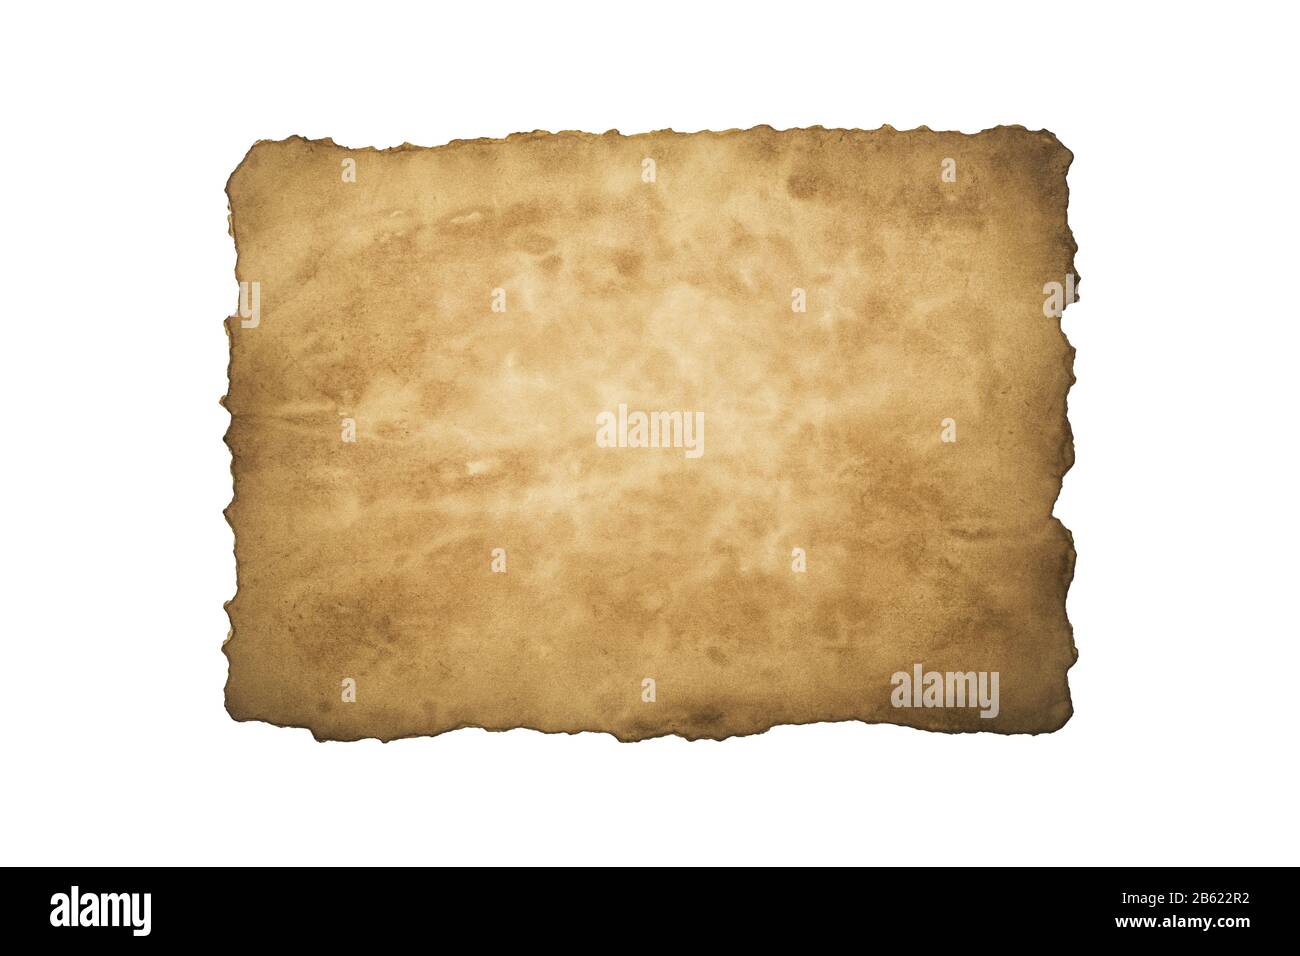 Old crushed vintage retro paper sheet   isolated on white background. Old photo texture with stains and scratches. Antique textured art concept. Stock Photo